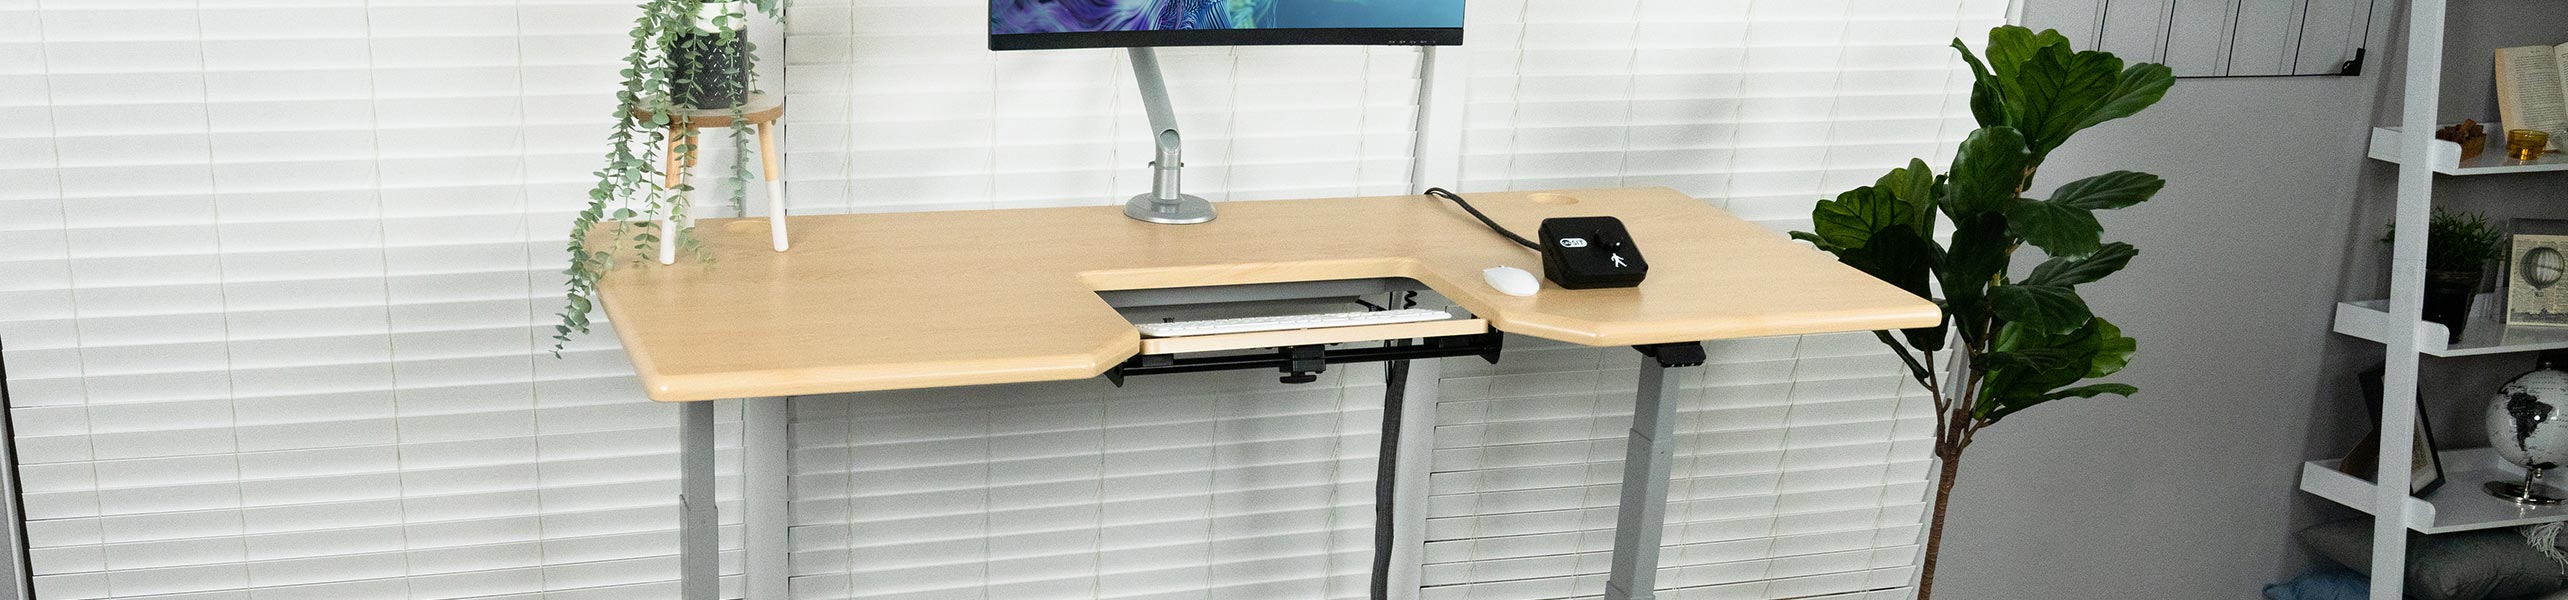 Lander Standing Desk with Built-in SteadyType Keyboard Tray for use with the Unsit Under-Desk Office Treadmill, Light Maple deskop on Silver base